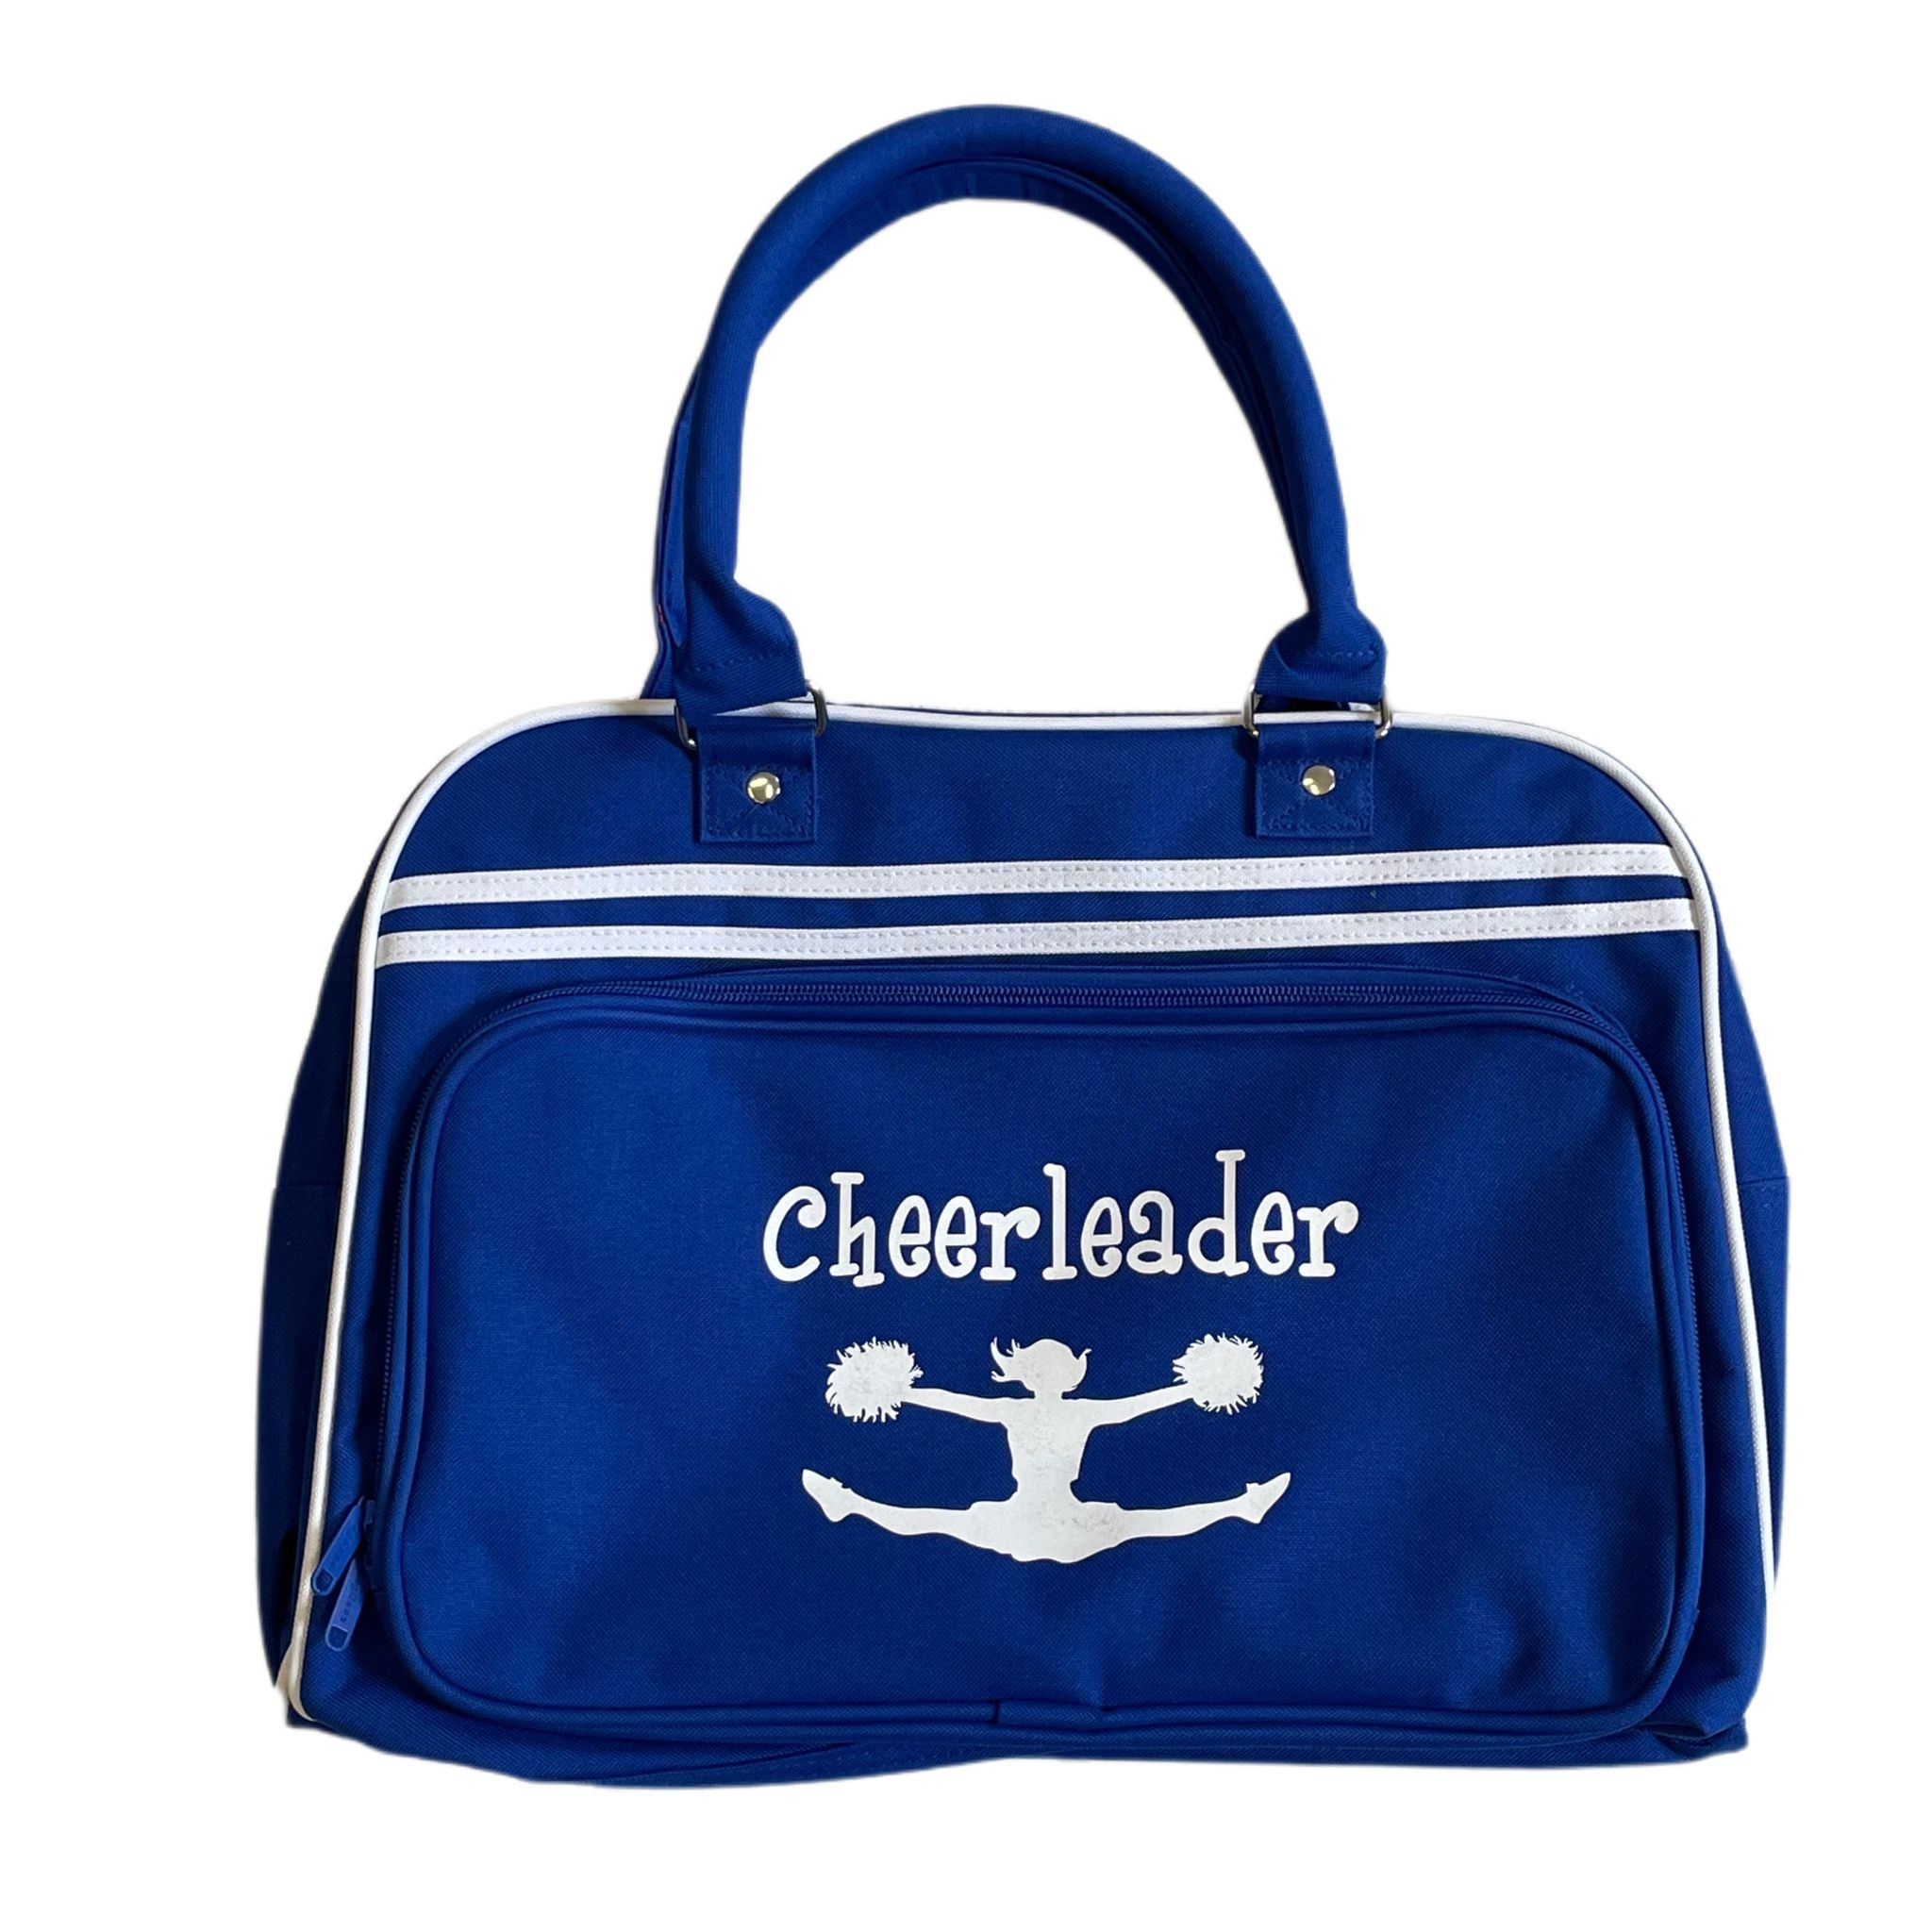 Bag with Cheerleader printing - end of stock